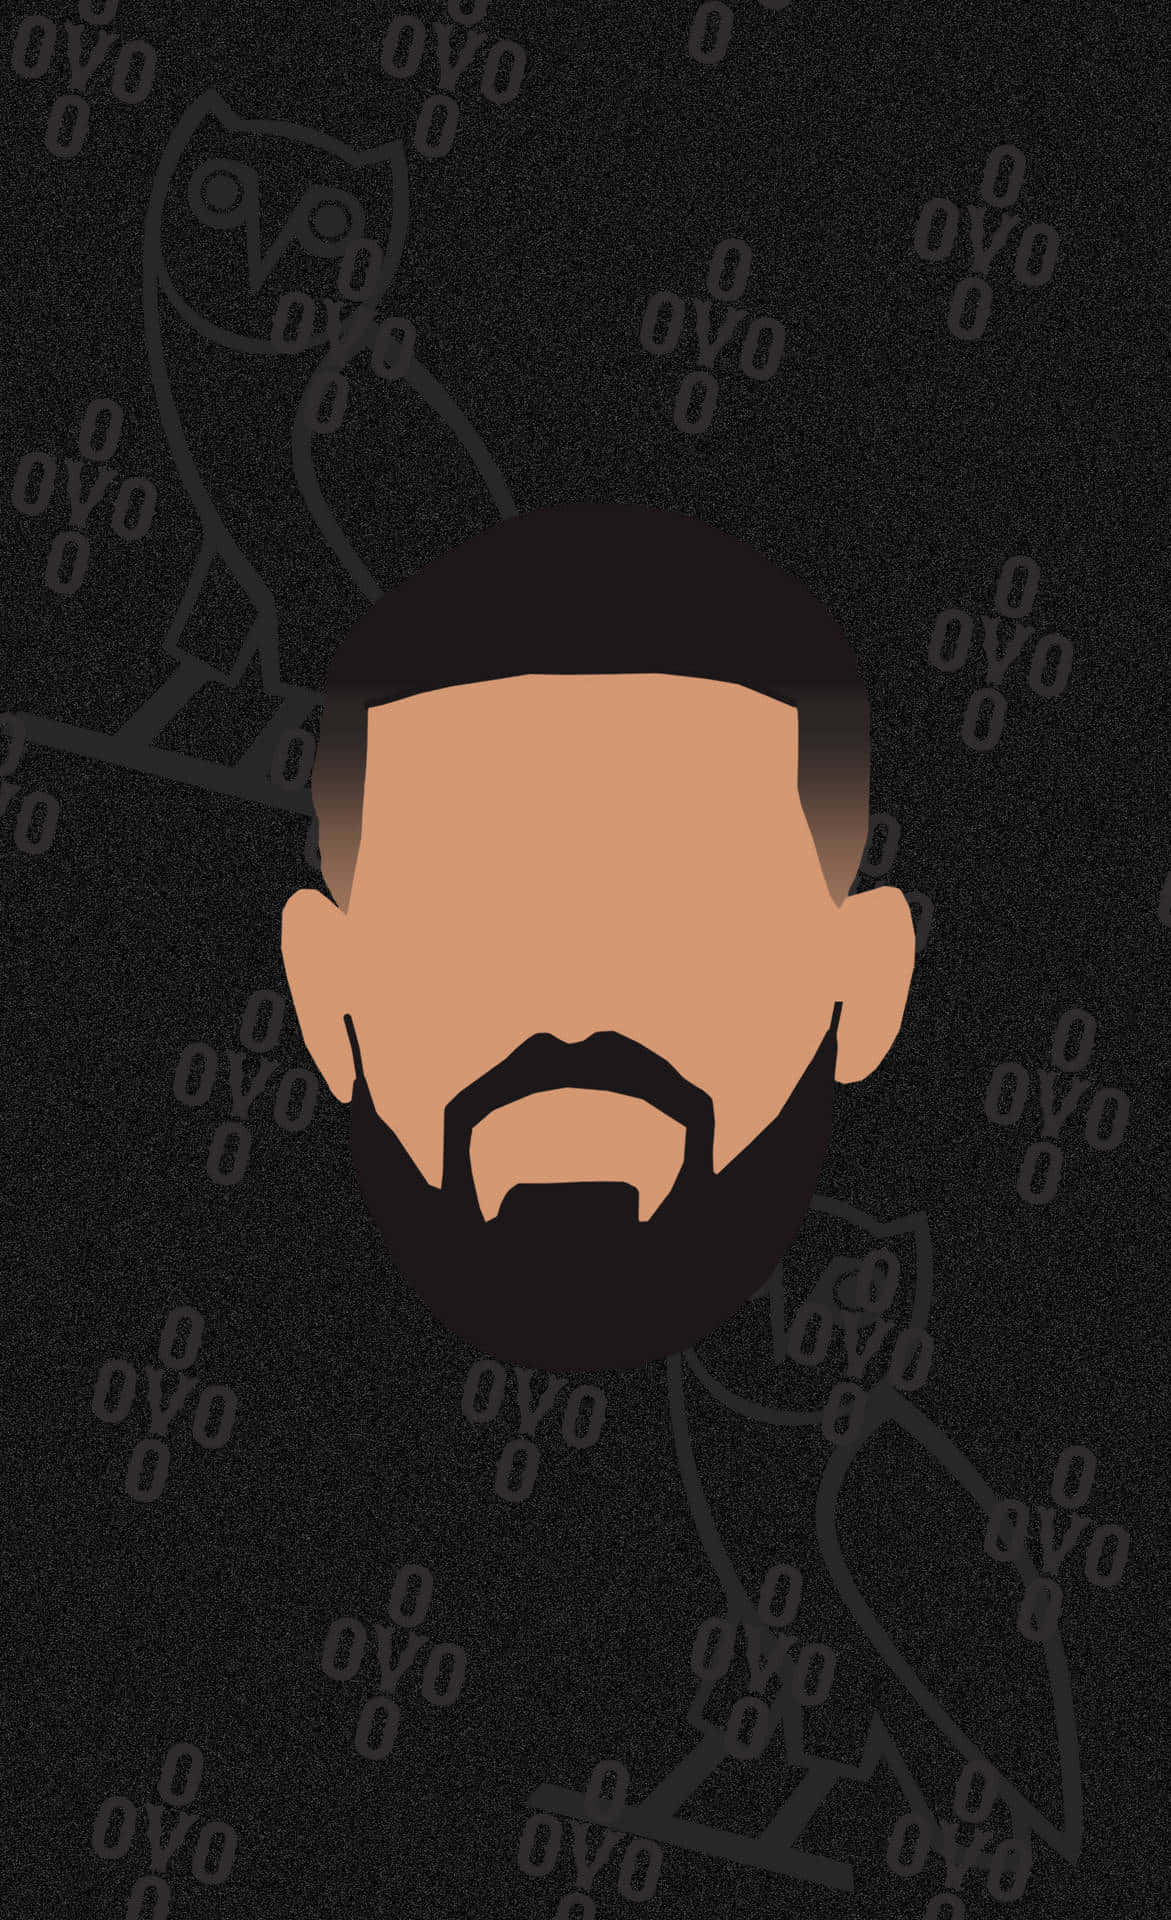 Invest in Your Own Technology with Drake Computer Wallpaper